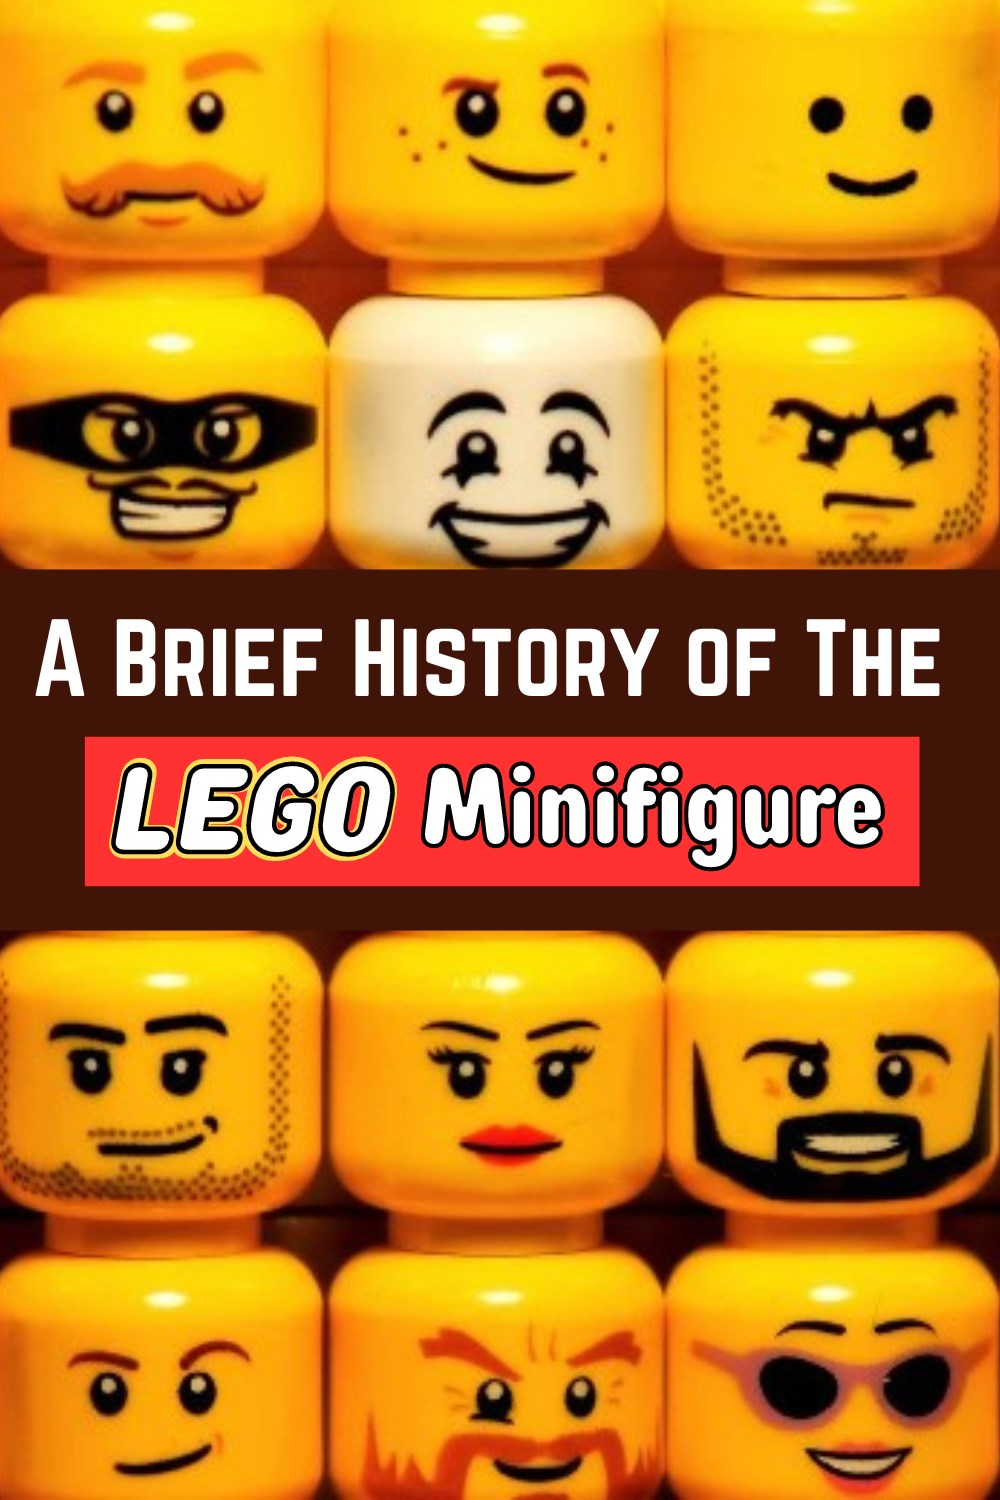 History of The LEGO Minifigure